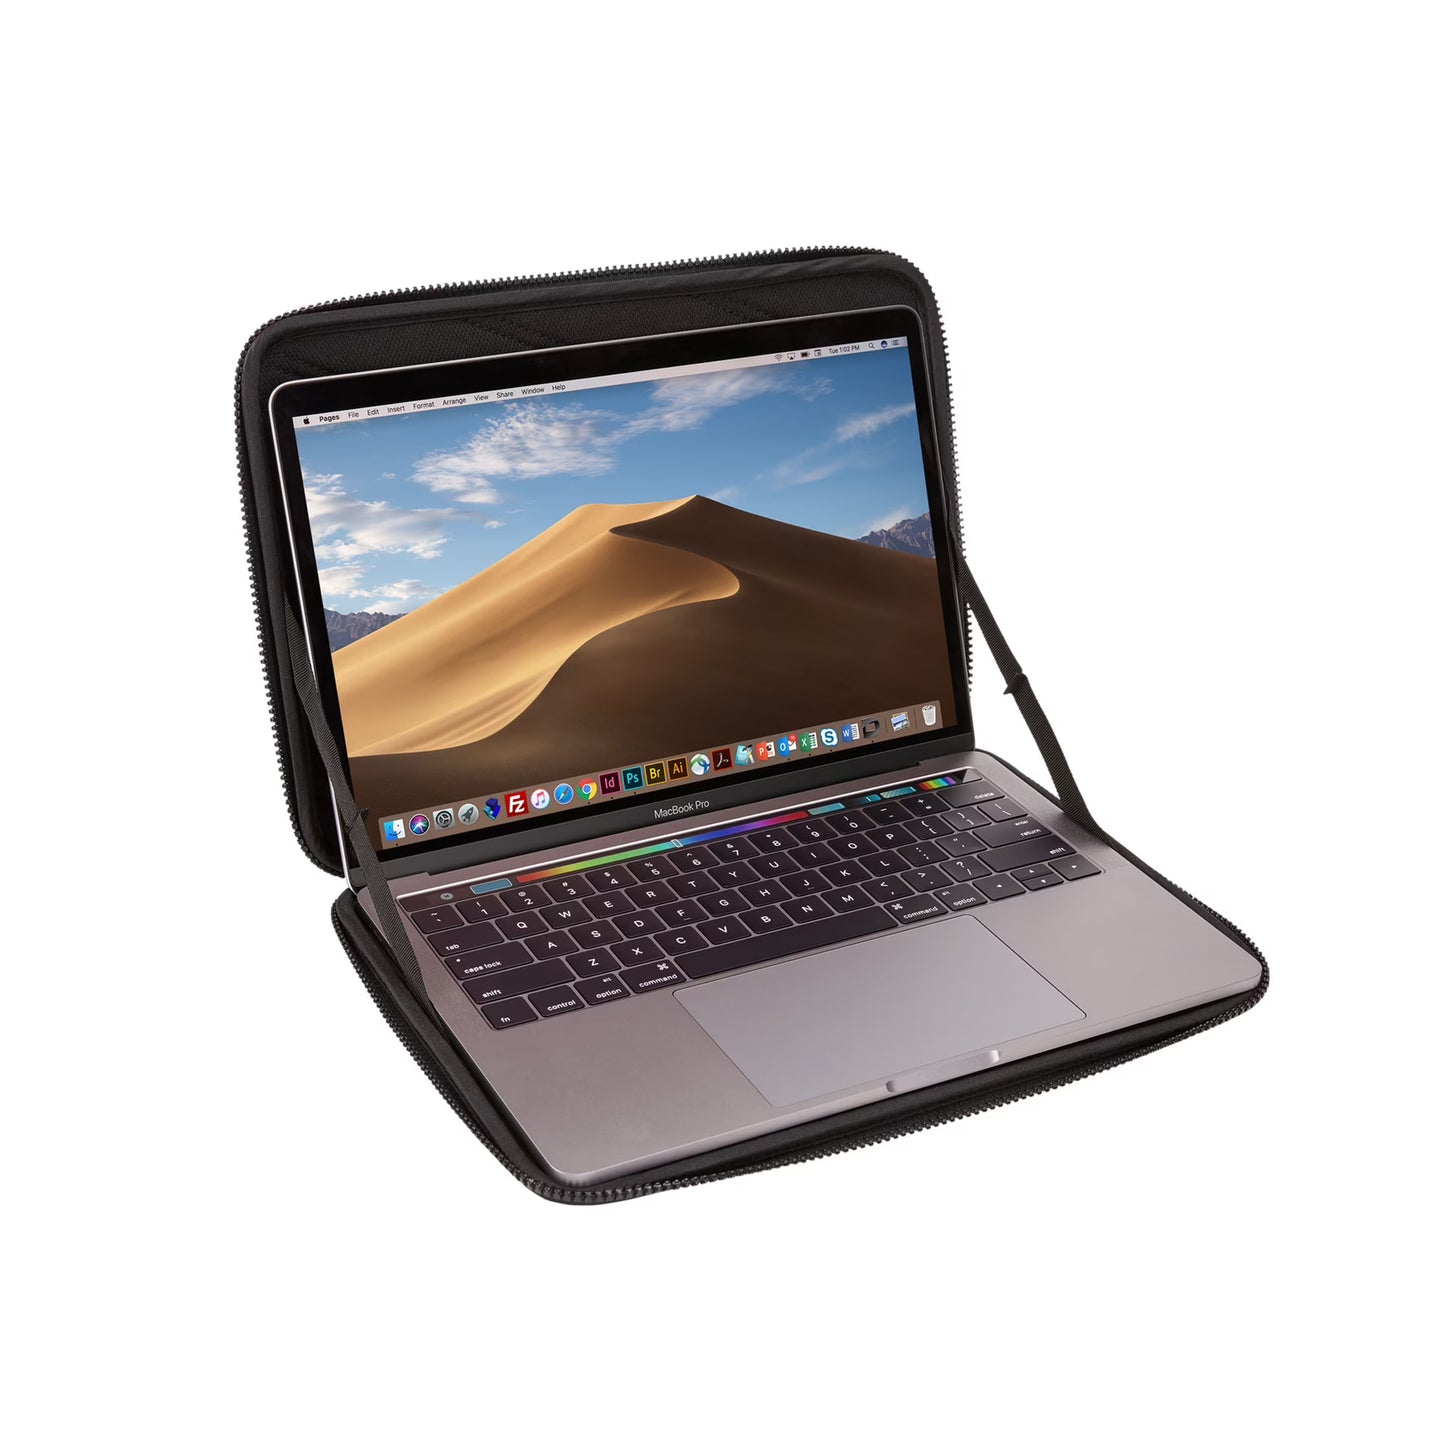 Thule Gauntlet 4.0 Sleeve for MacBook Pro 16" - Blue (Barcode: 0085854250054 )